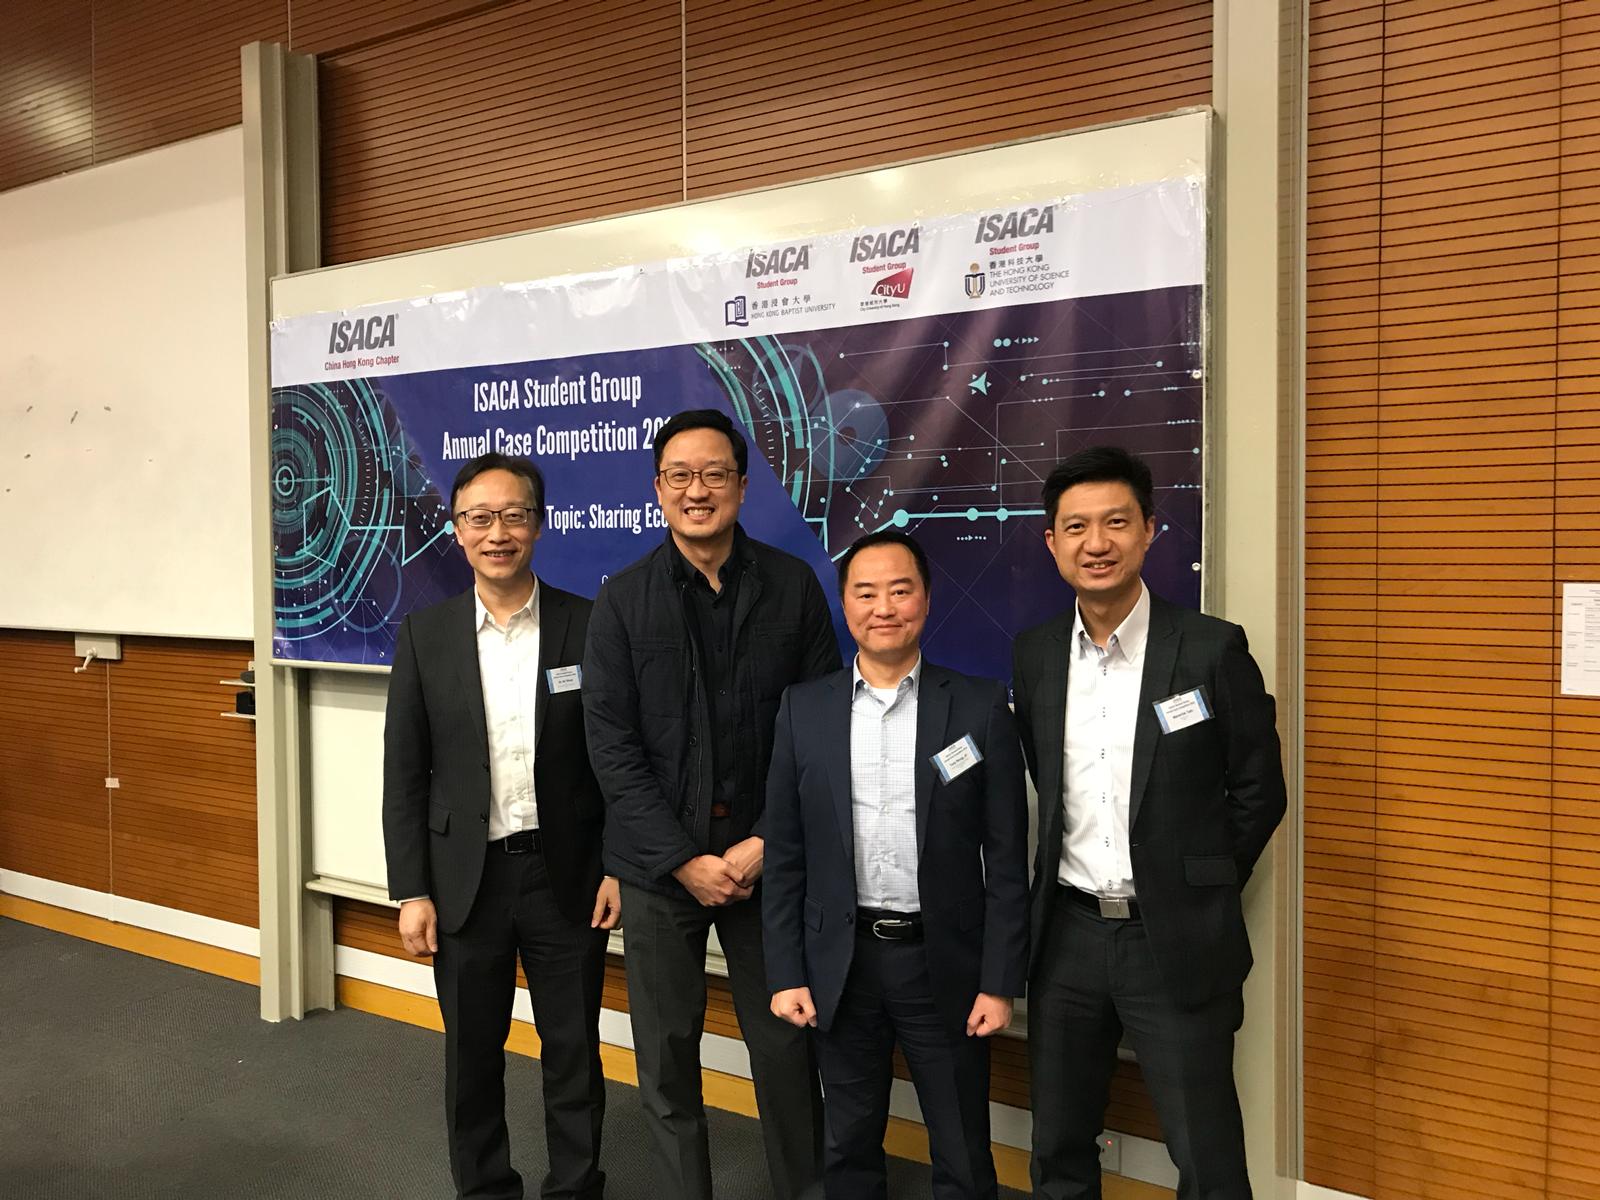 Mr. Tony Wong, Assistant Government Chief Information Officer (Industry Development) (Second right) with other judges, Dr SHUM Kam Hong, Director, Applied Cryptosystems of the Division of Security & Data Sciences, Hong Kong Applied Science and Technology (first left), Mr. Leroy YAU, President, ISACA China Hong Kong Chapter (second left) and Mr. Maverick TAM, Chief Risk Officer, Hong Kong Interbank Clearing Limited (first right) at the “ISACA Student Group Annual Case Competition 2019”.